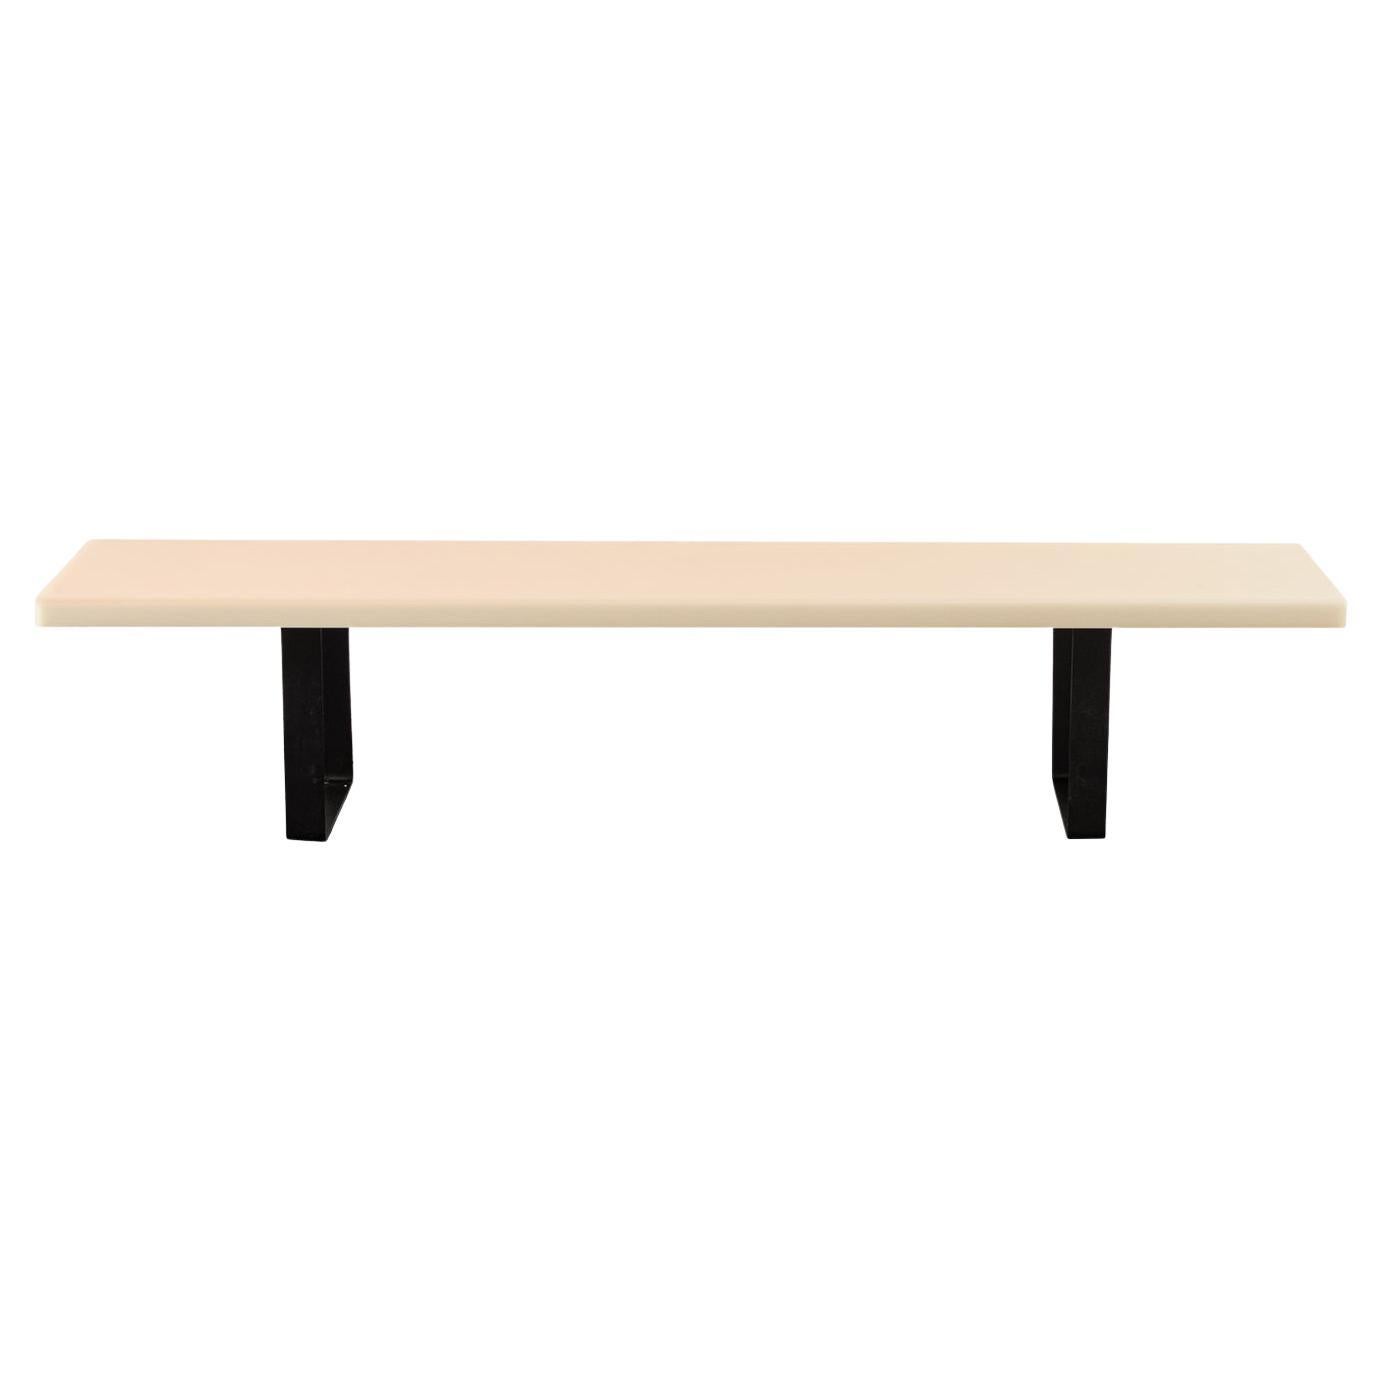 Tone Resin Bench/Seating Light Beige by Facture, REP by Tuleste Factory For Sale